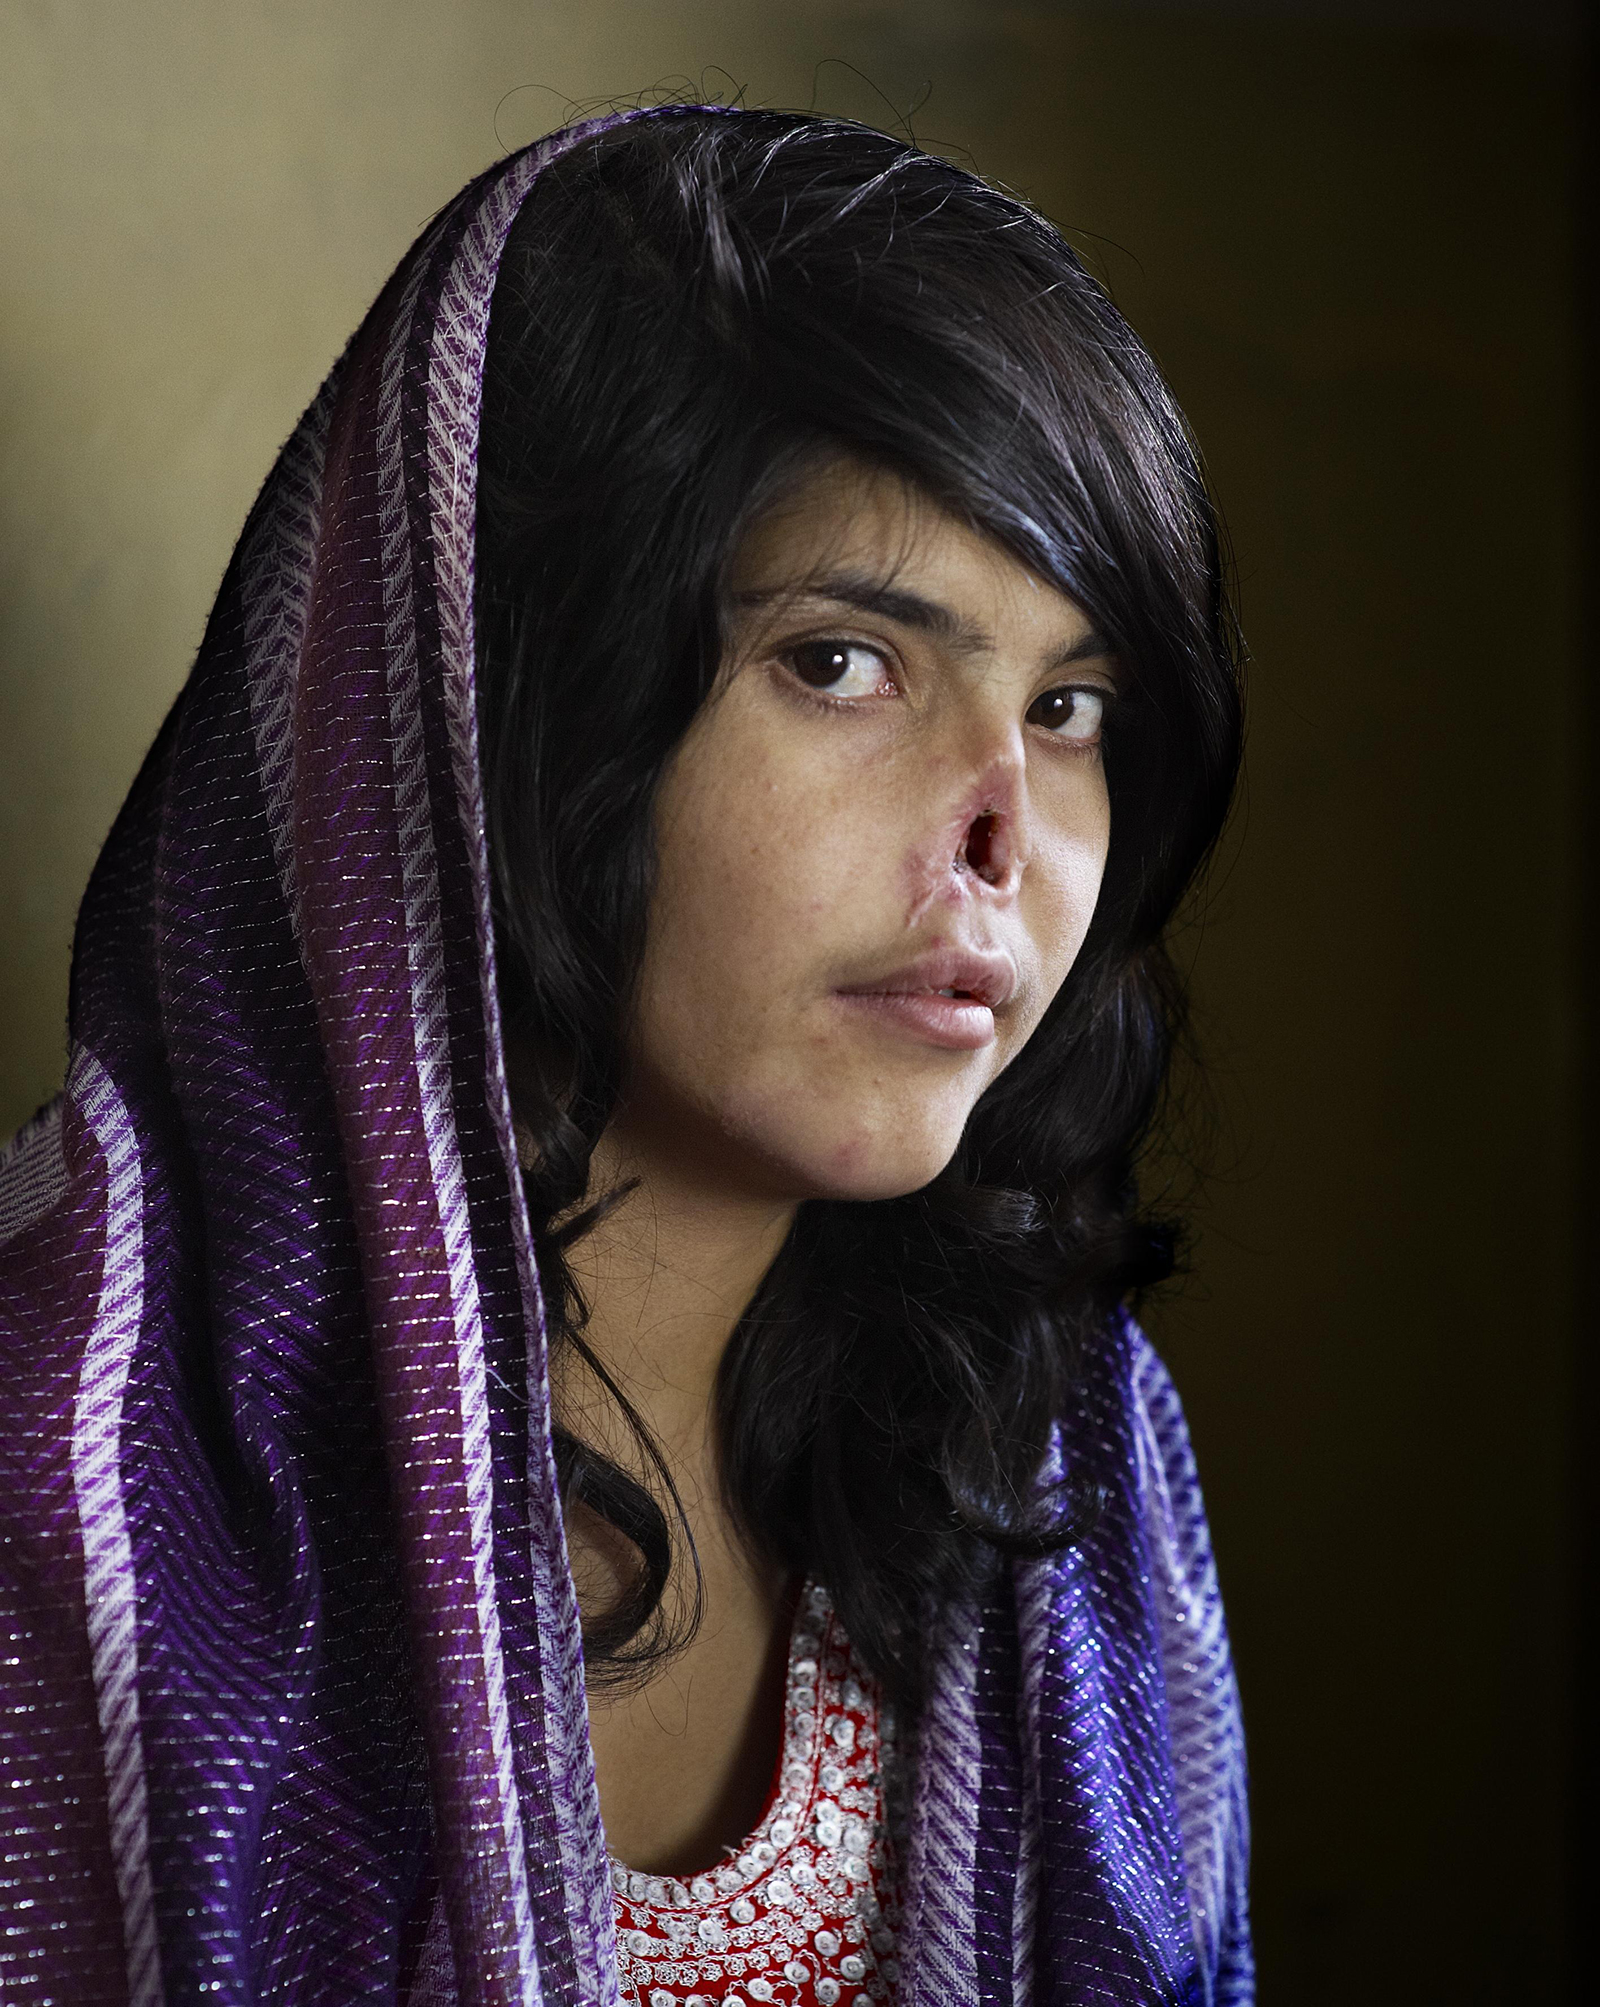 An Afghan woman who had her nose and ears cut off by the Taliban for trying to leave her husband.